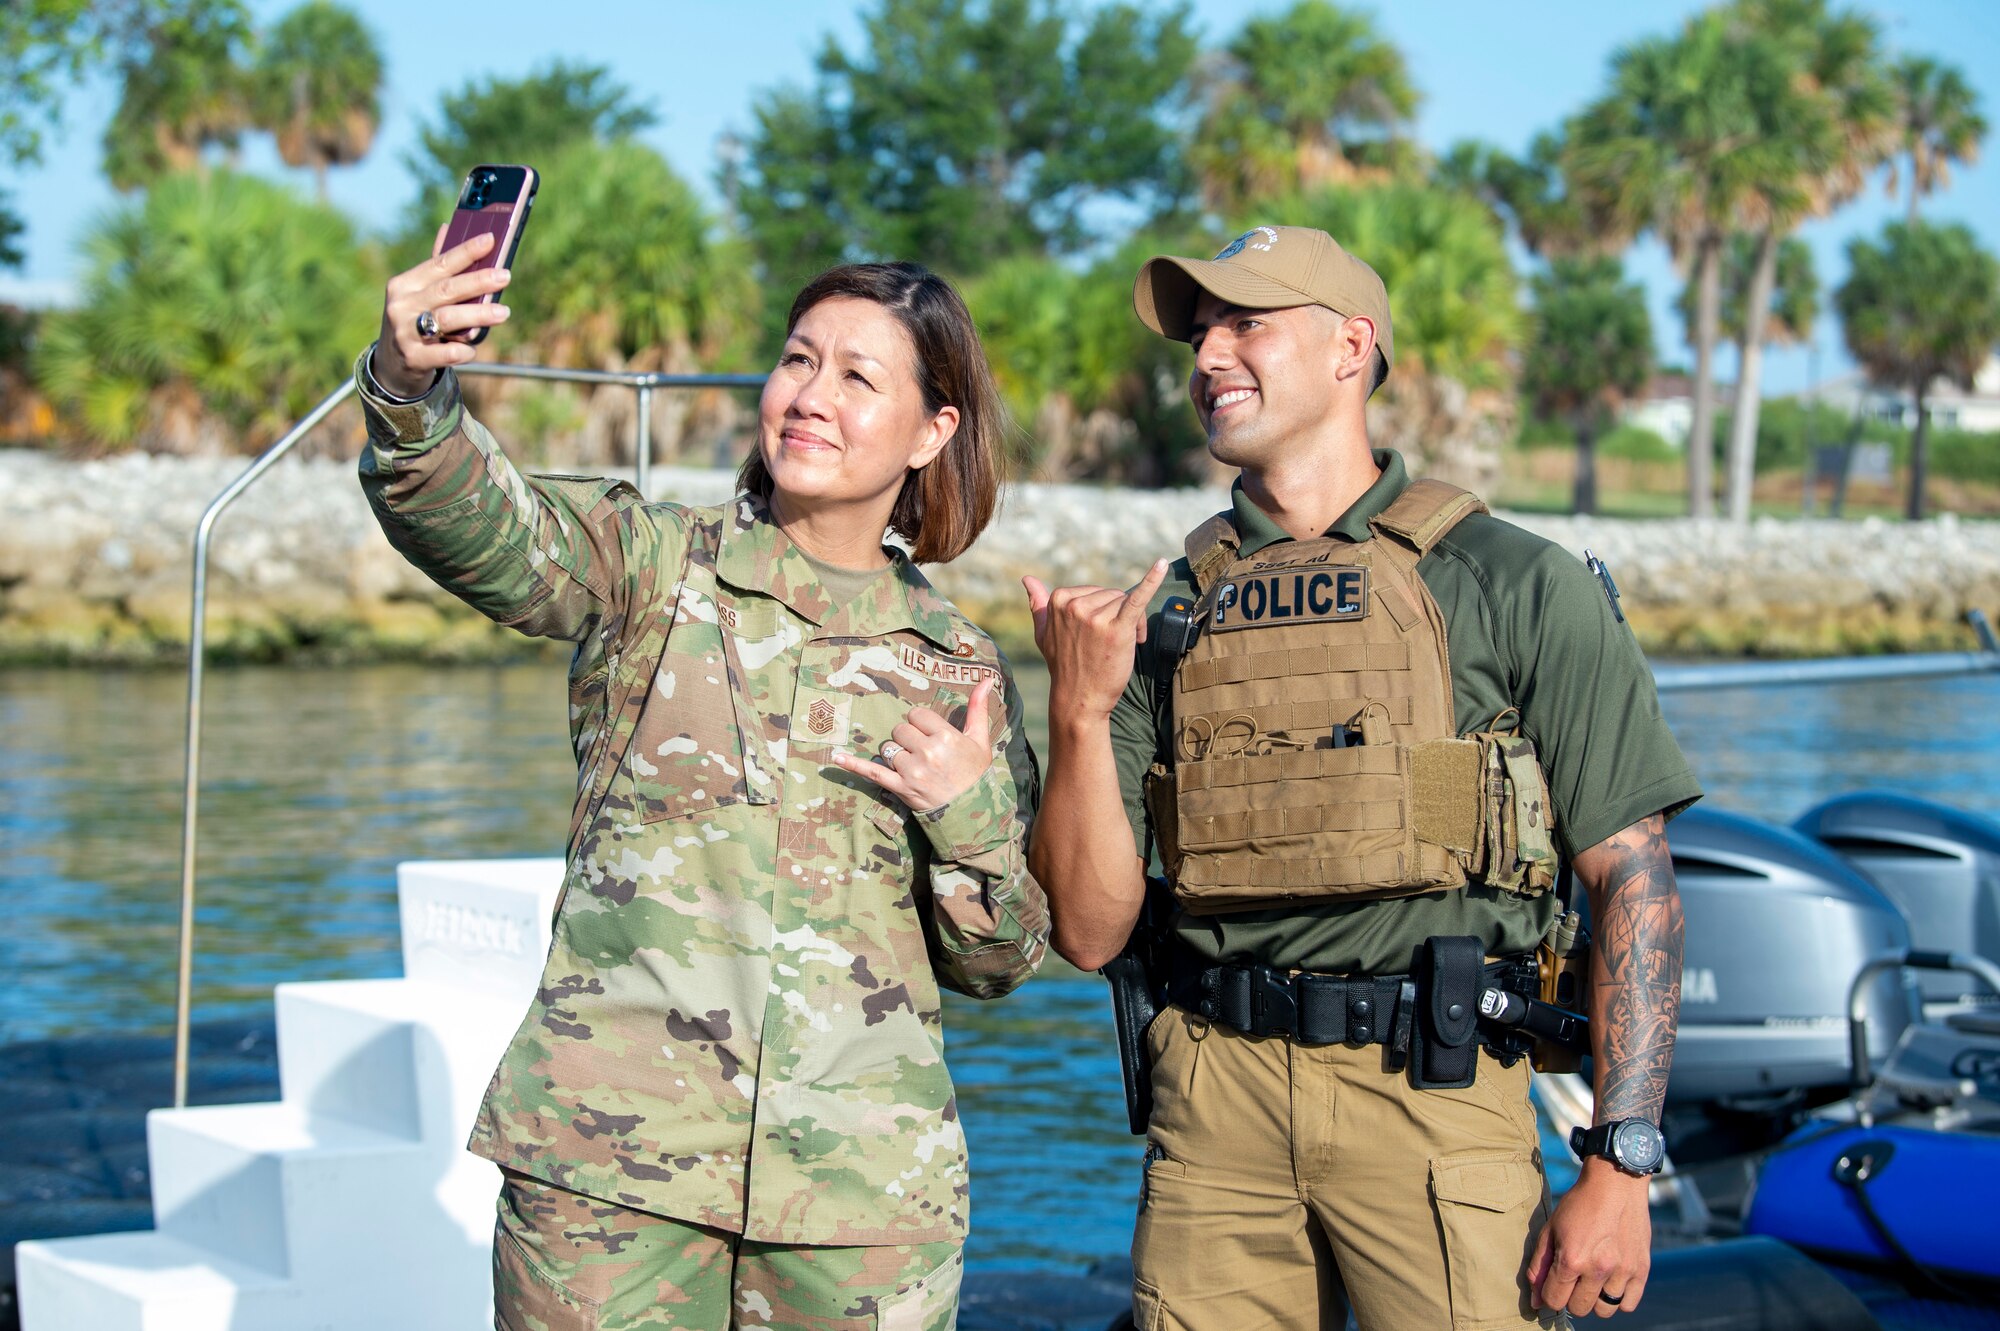 Chief Master Sgt. of the Air Force JoAnne S. Bass poses for a photo with U.S. Air Force Staff Sgt. William Au, a 6th Security Forces Squadron (SFS) marine patrolman, at MacDill Air Force Base, June 10, 2021.